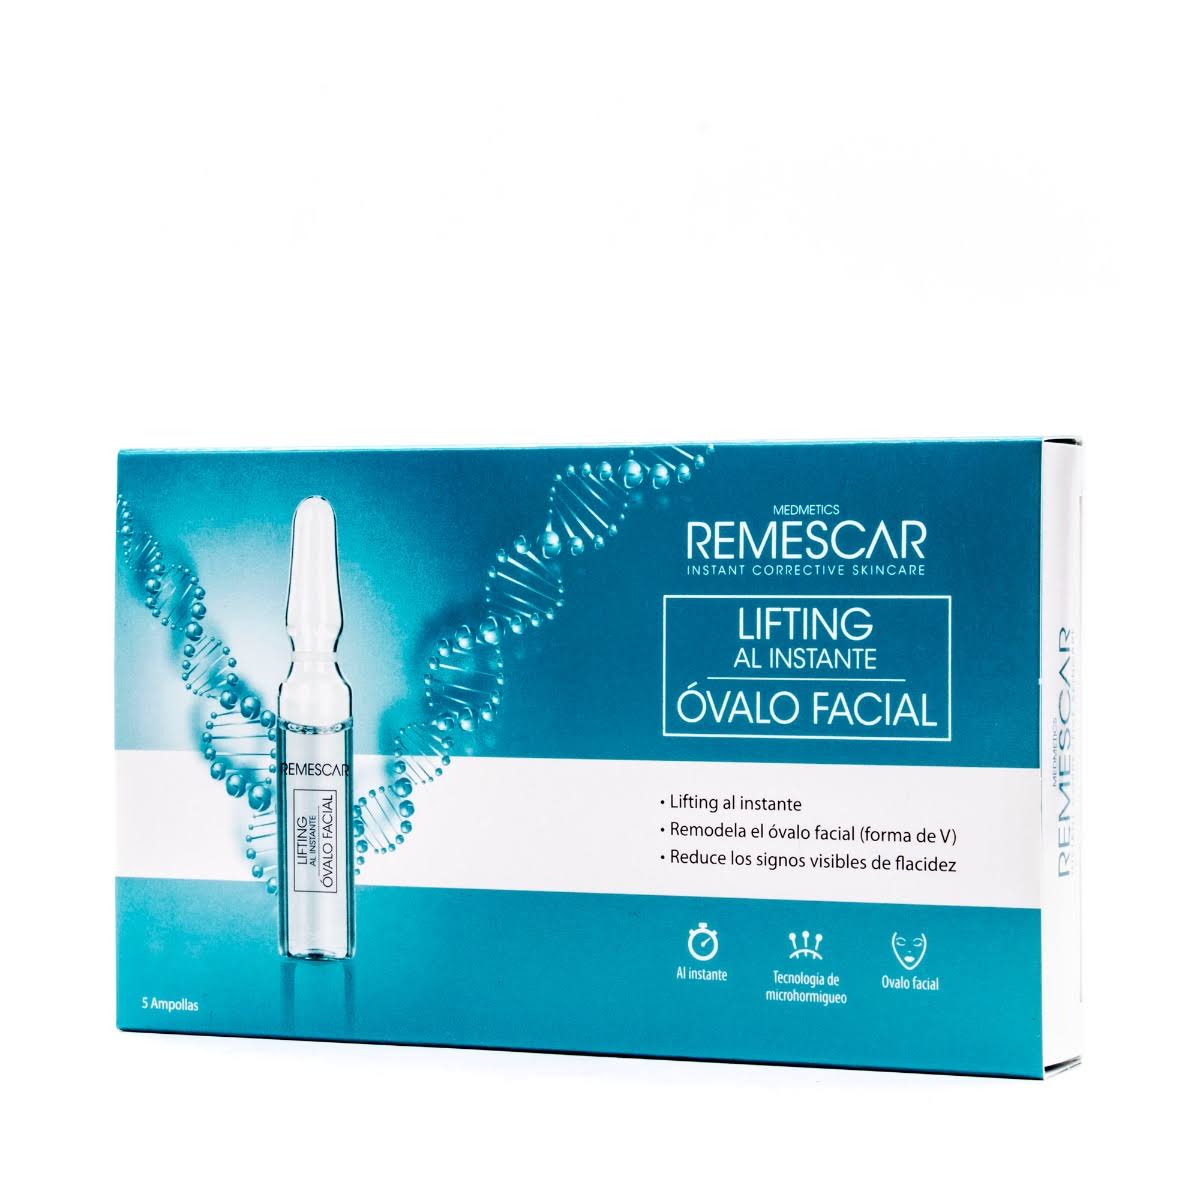 Remescar Ampoules Instant Lifting Oval Facial 5 Ampoules